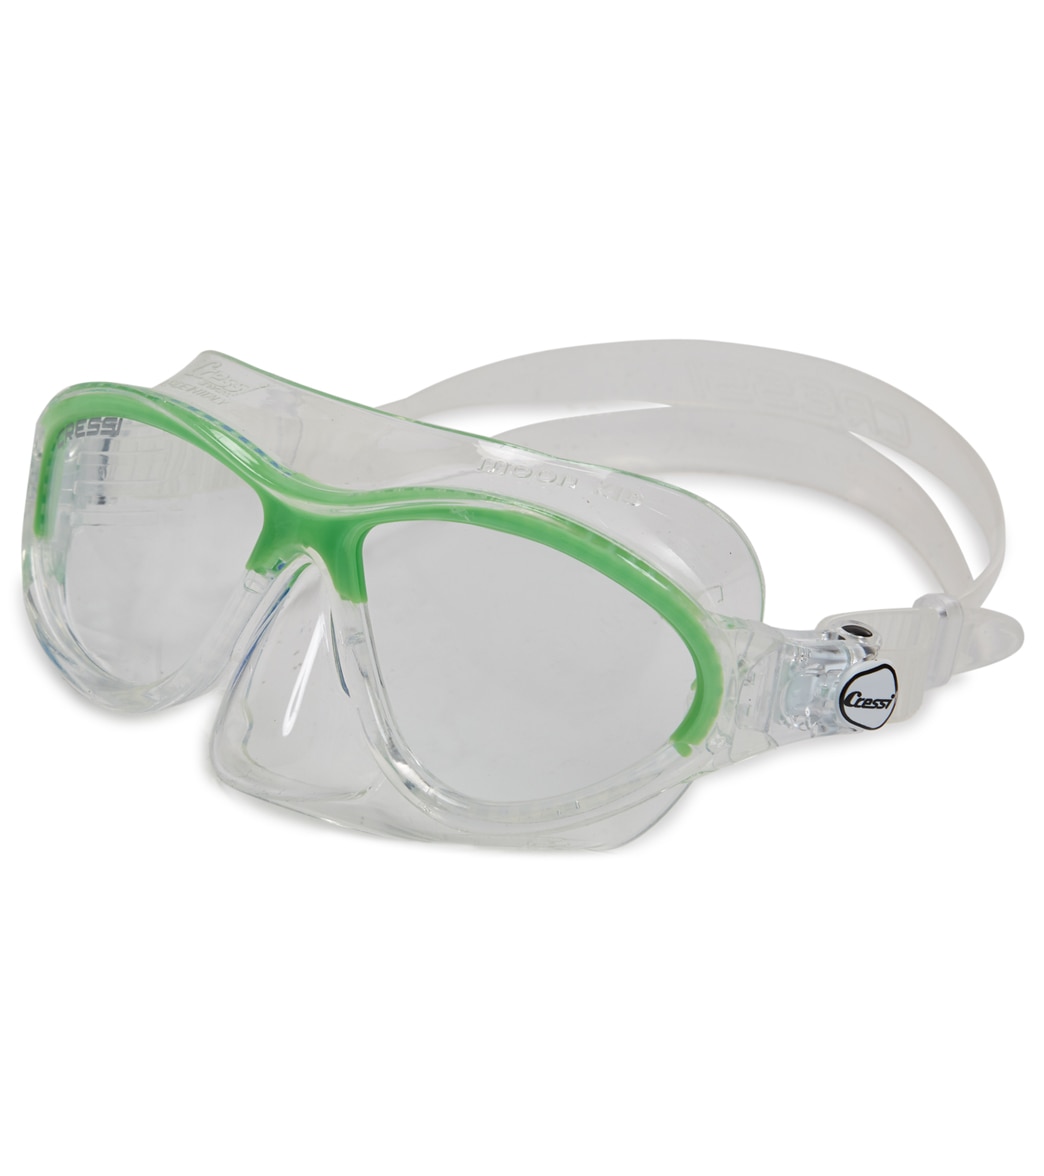 Cressi Kids Moon Snorkeling/Swim Mask - Clear/Lime - Swimoutlet.com